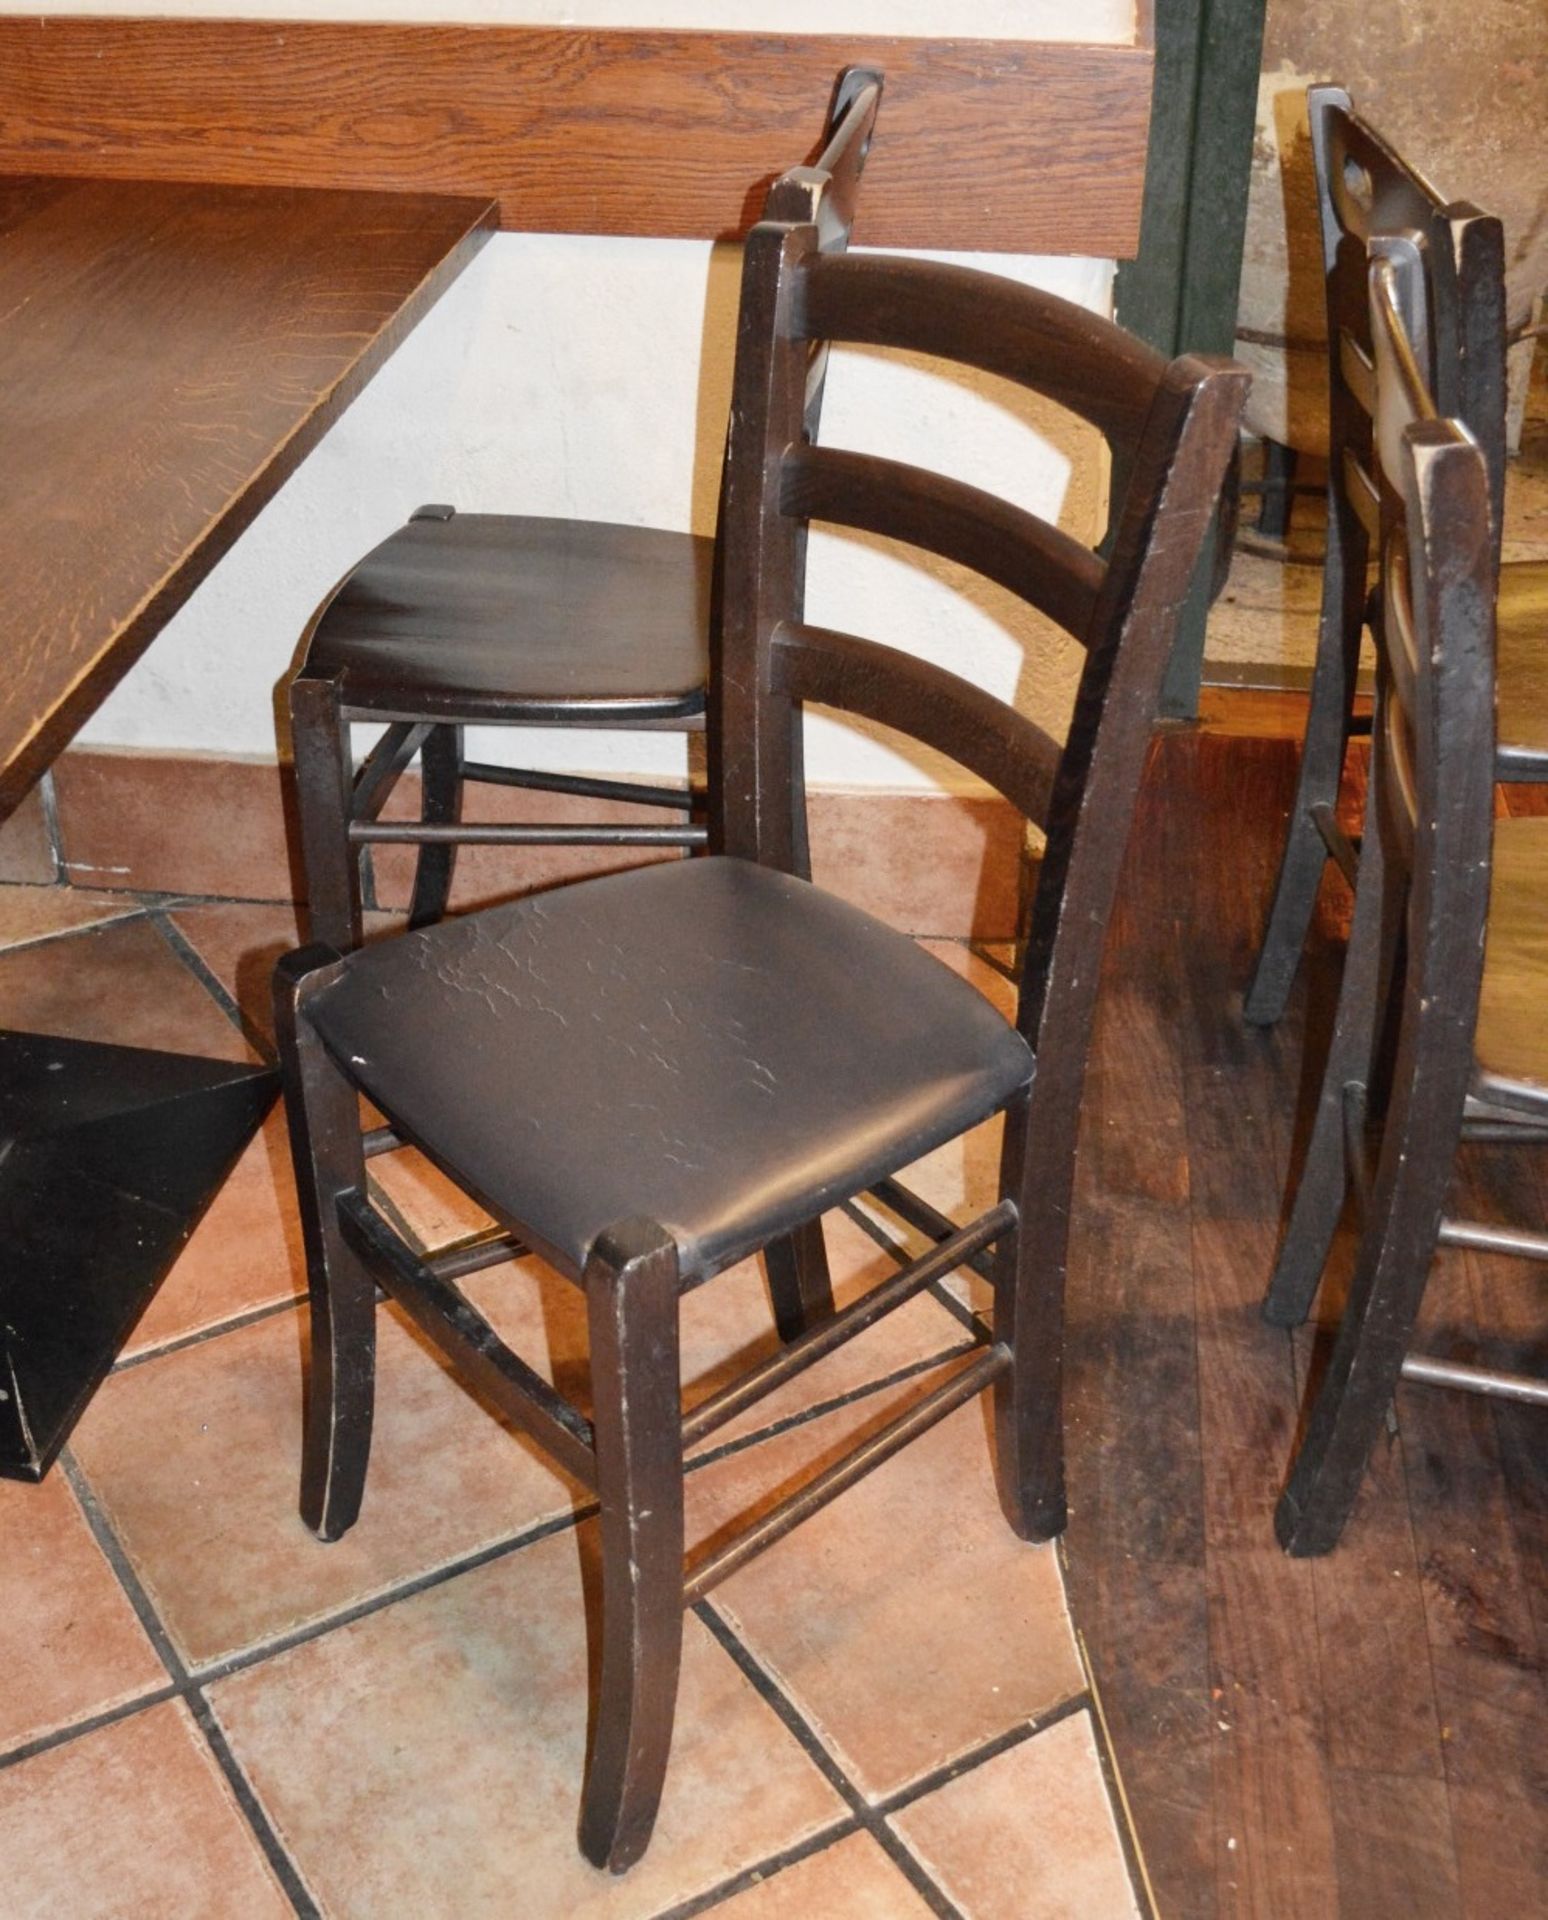 10 x Assorted Rustic Restaurant Dining Chairs - Taken From A Popular Eatery - Manchester M17 - Image 6 of 6